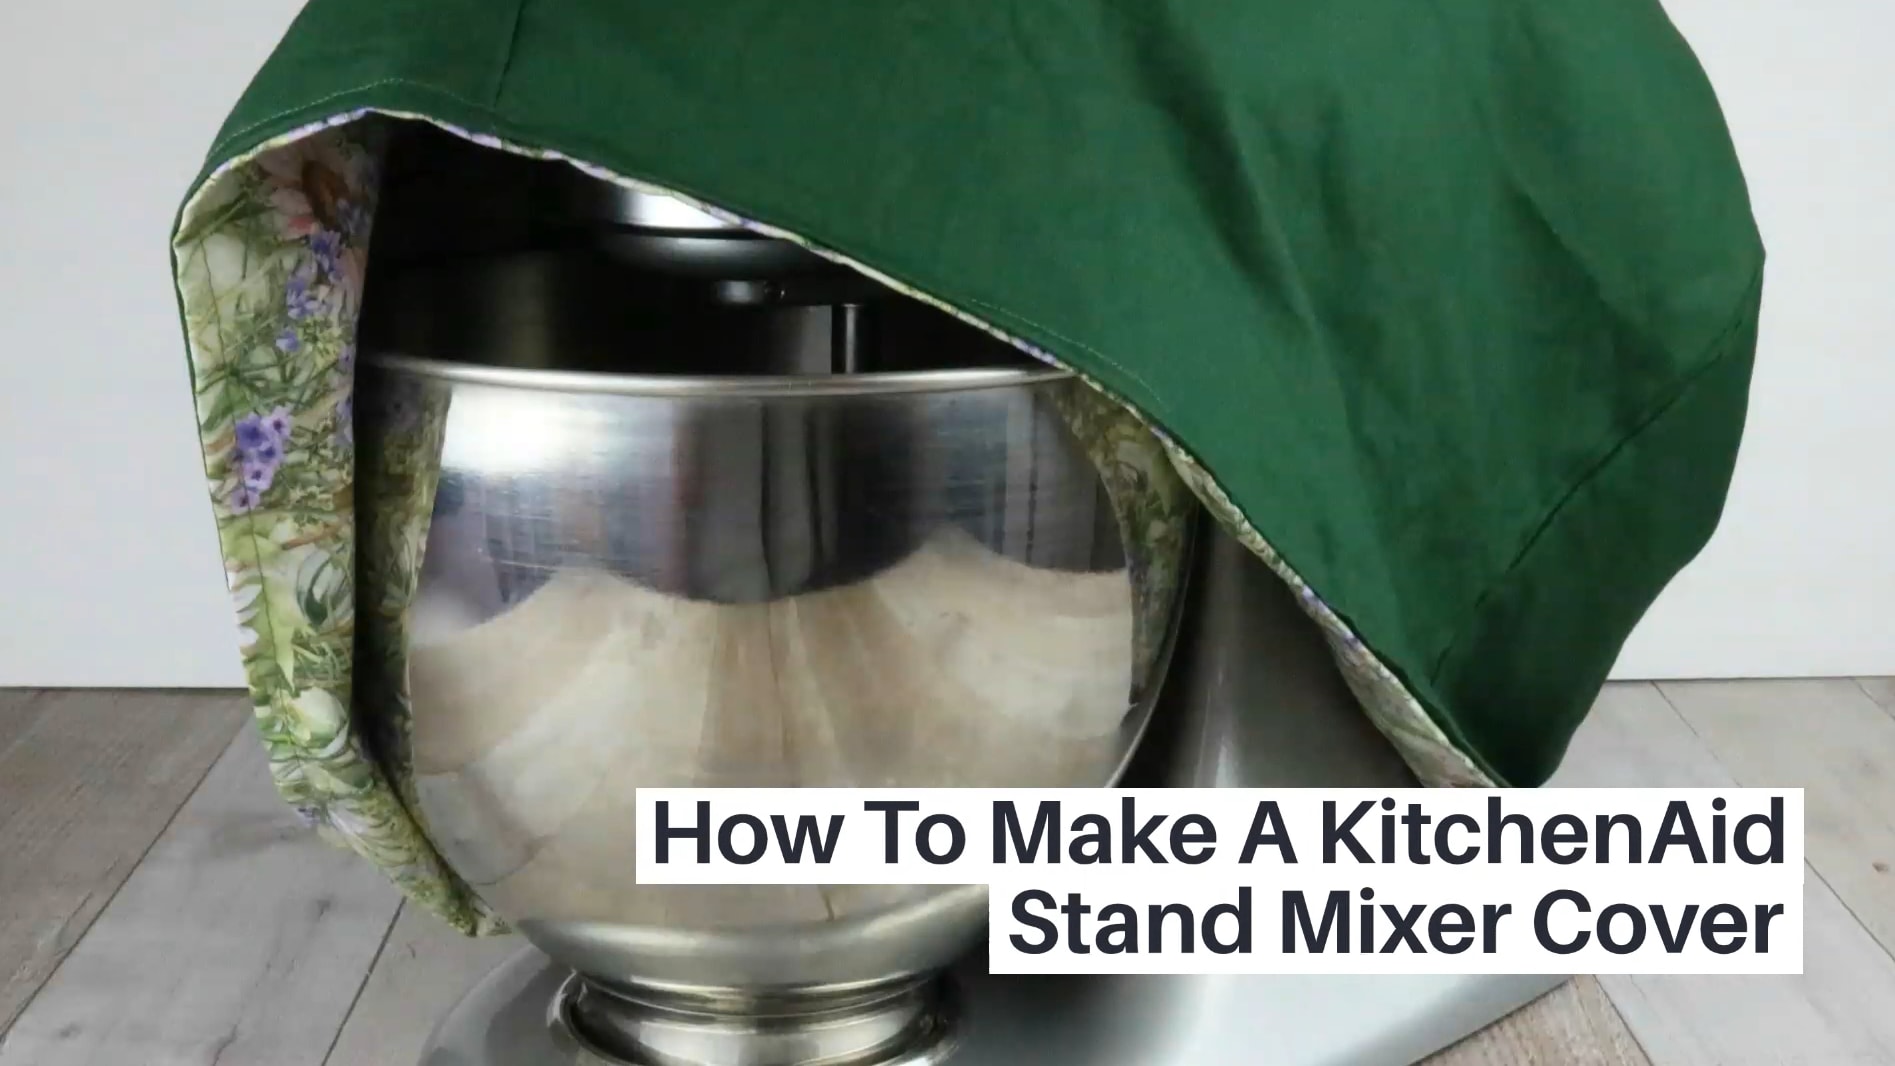 Sew A Kitchenaid Stand Mixer Cover